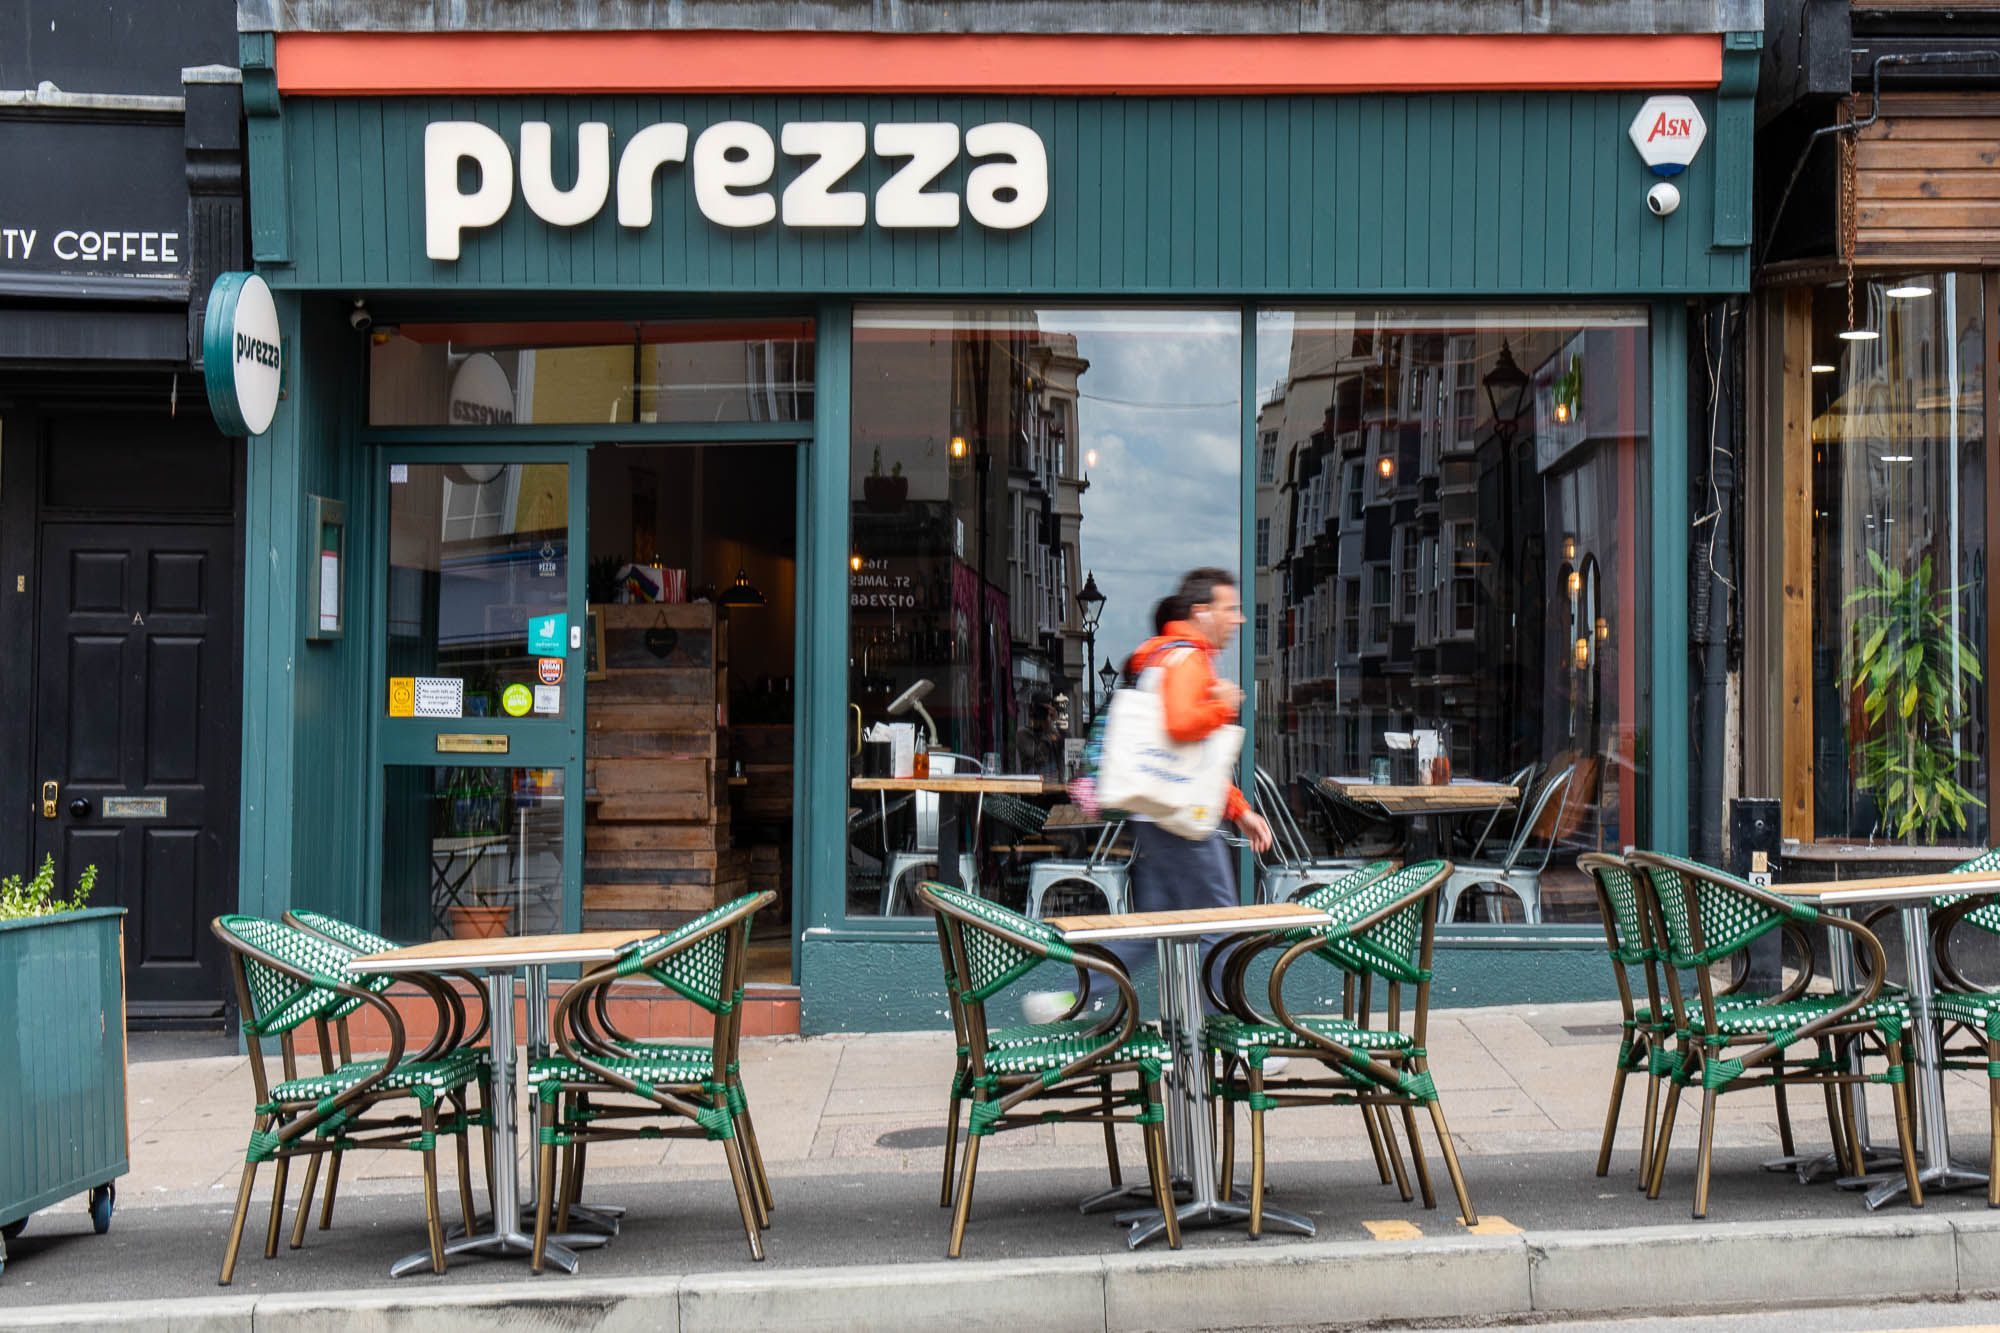 Purezza exterior, green venue with with sign, wooden chairs and tables with green covers